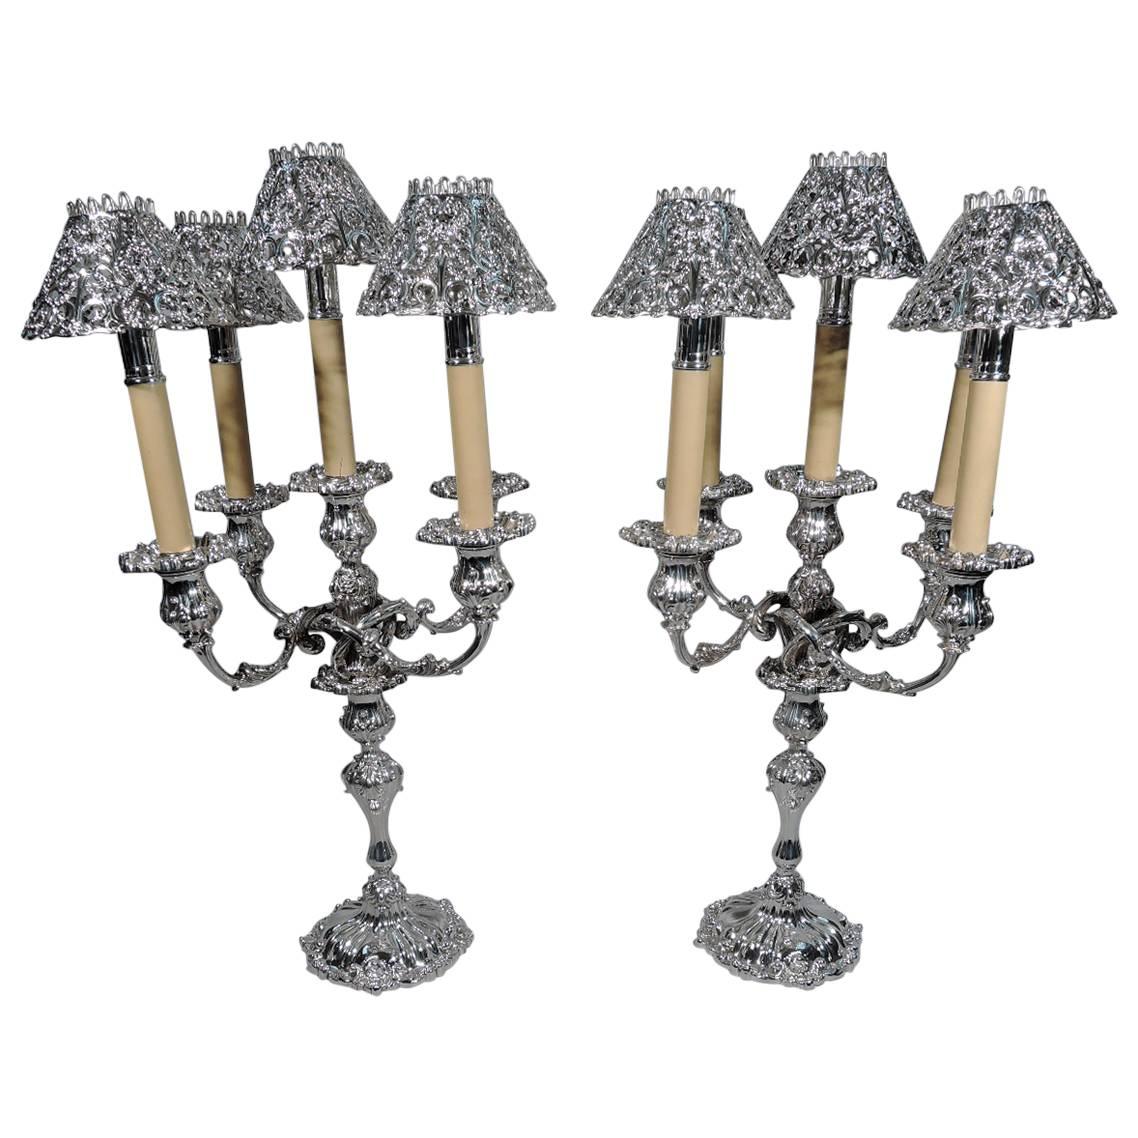 Pair of JE Caldwell Sterling Silver Five-Light Candelabra with Shades